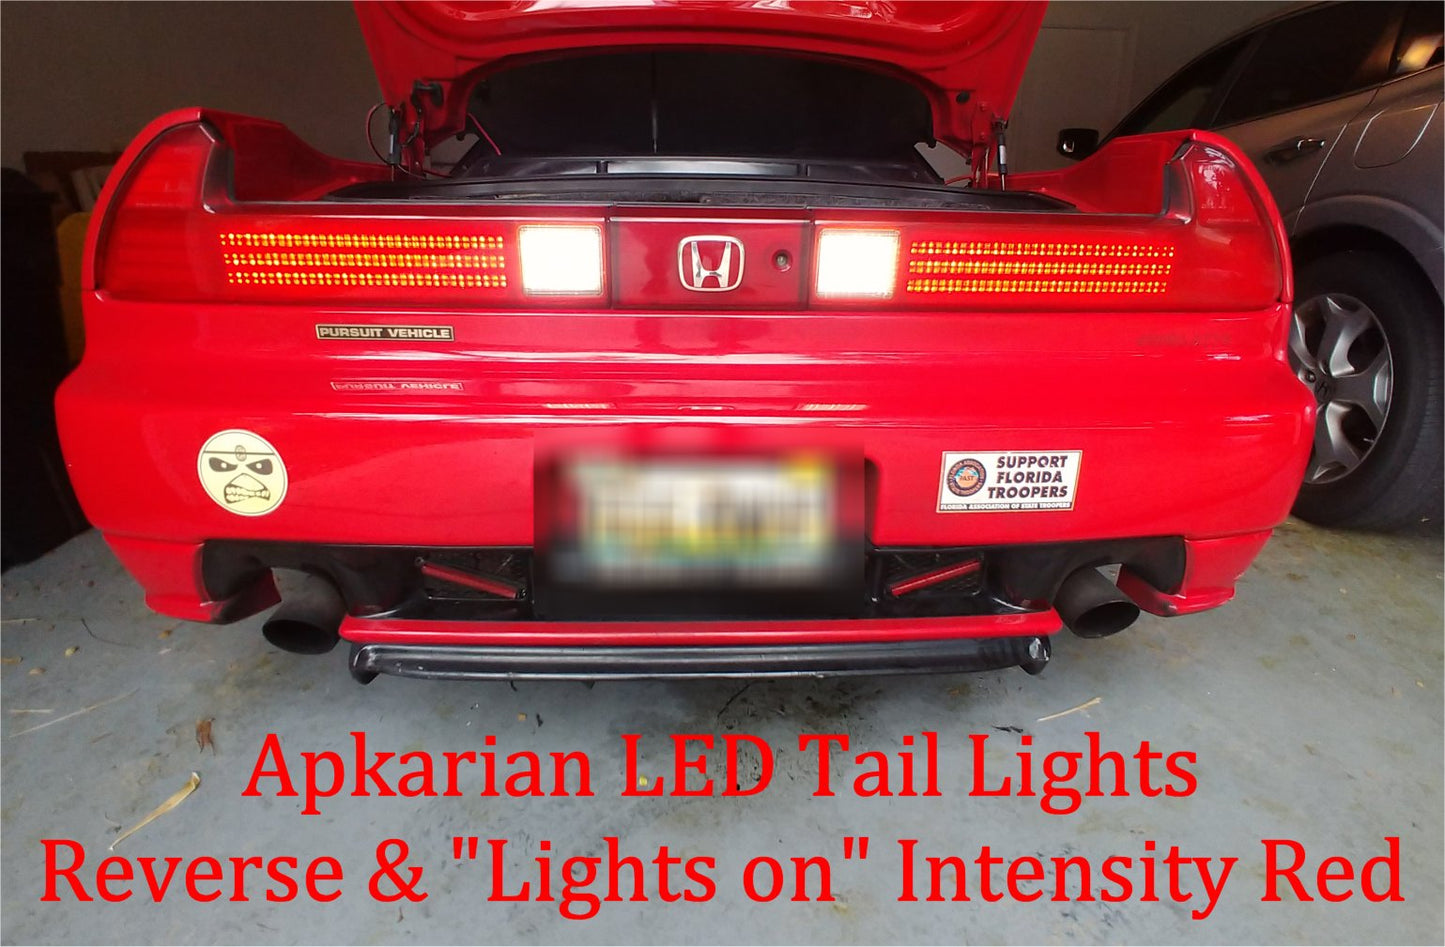 Apkarian 3 Bar LED Taillights - Used